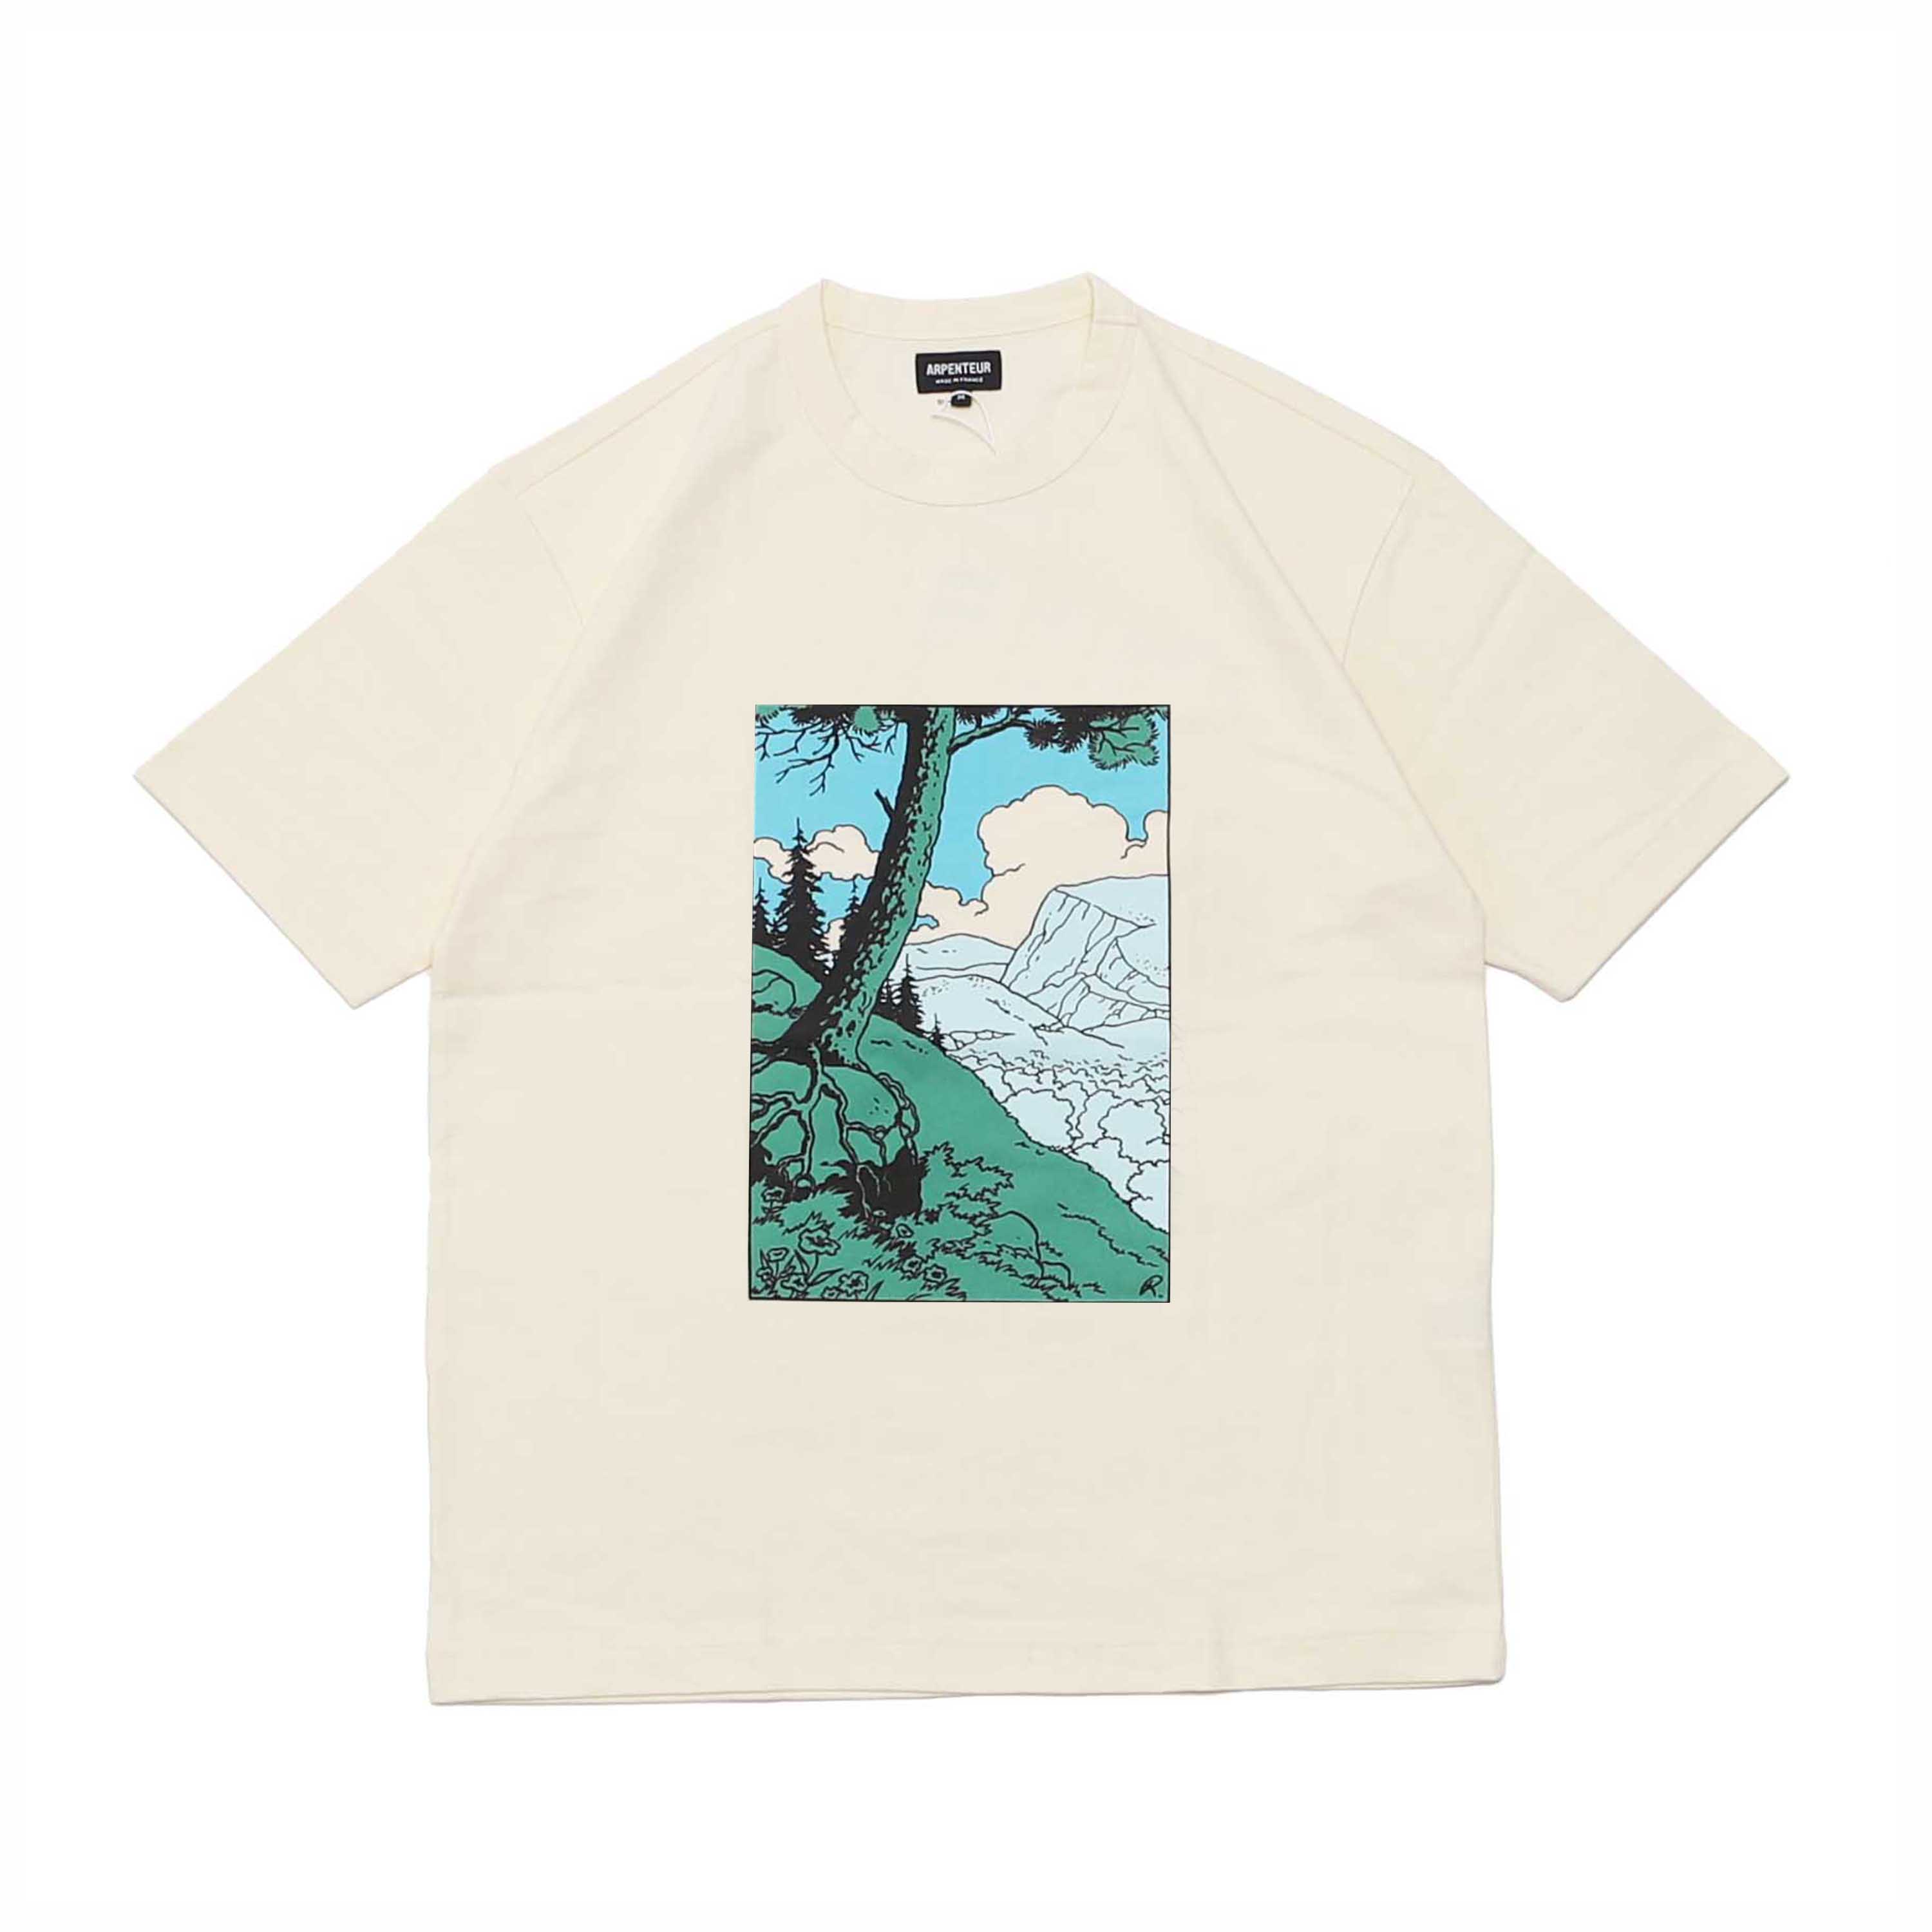 GRAPHIQUE S/S TEE - NATURAL/GREEN VALLEY